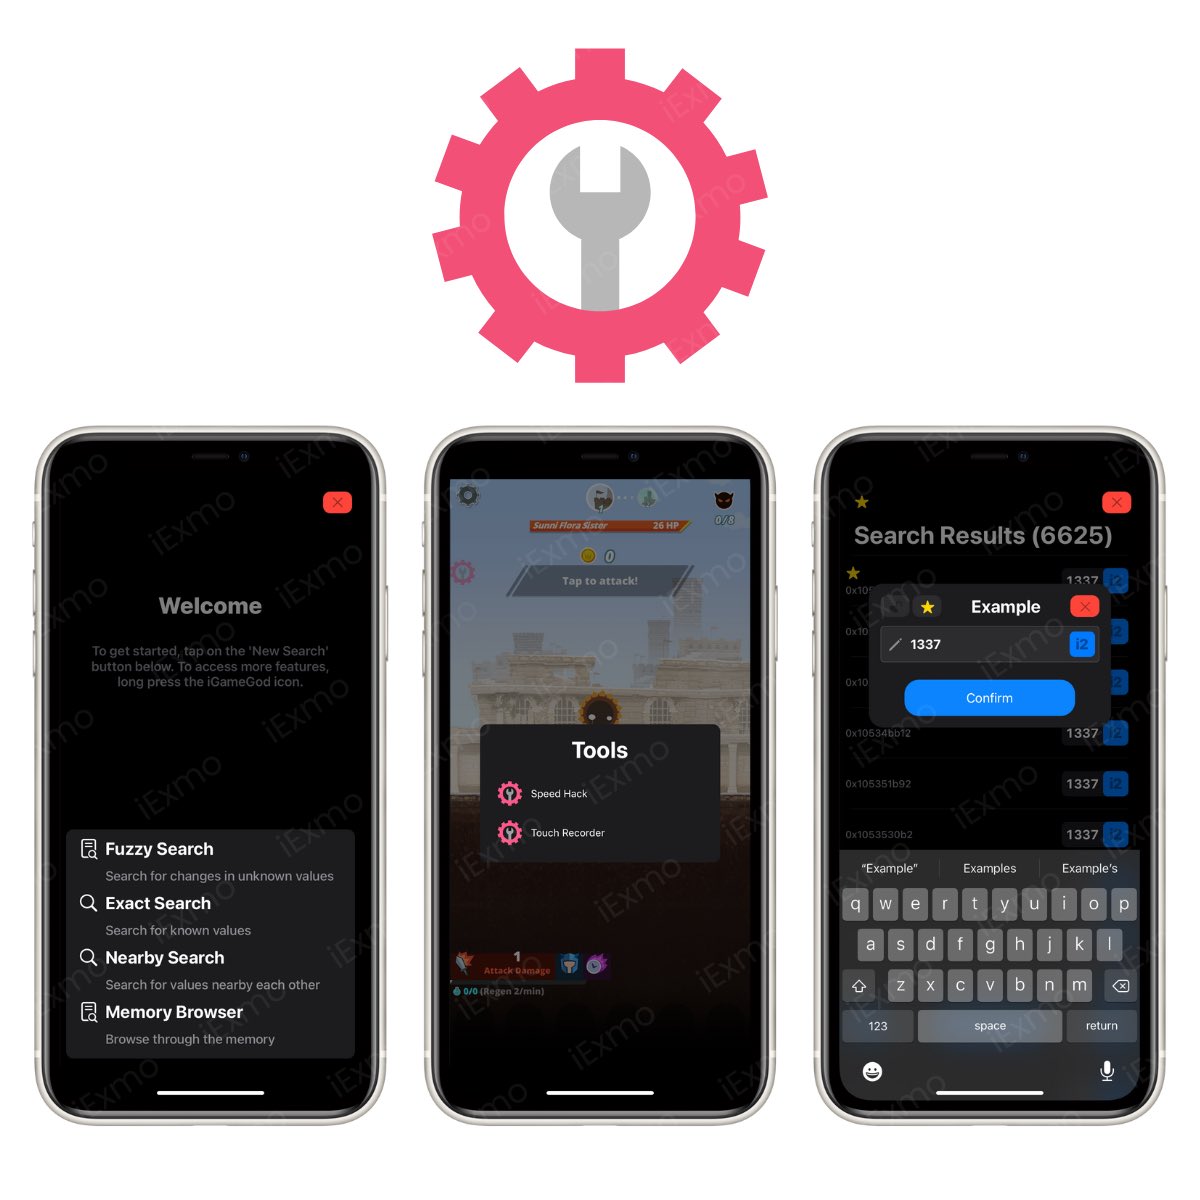 #iGameGod: The game Cheat Engine for iOS allows you to hack games🔥
 
iexmo.com/updates/igameg…

✅Speed Hack,Touch Recorder,Offset Patcher,Memory Editor,Spoofer, #IPA decryptor!

#Follow for Latest Updates🔄 

#jailbreak #nojailbreak #iOS #iOS15 #iOS16 #iOS14 #TrollStore #AppStore